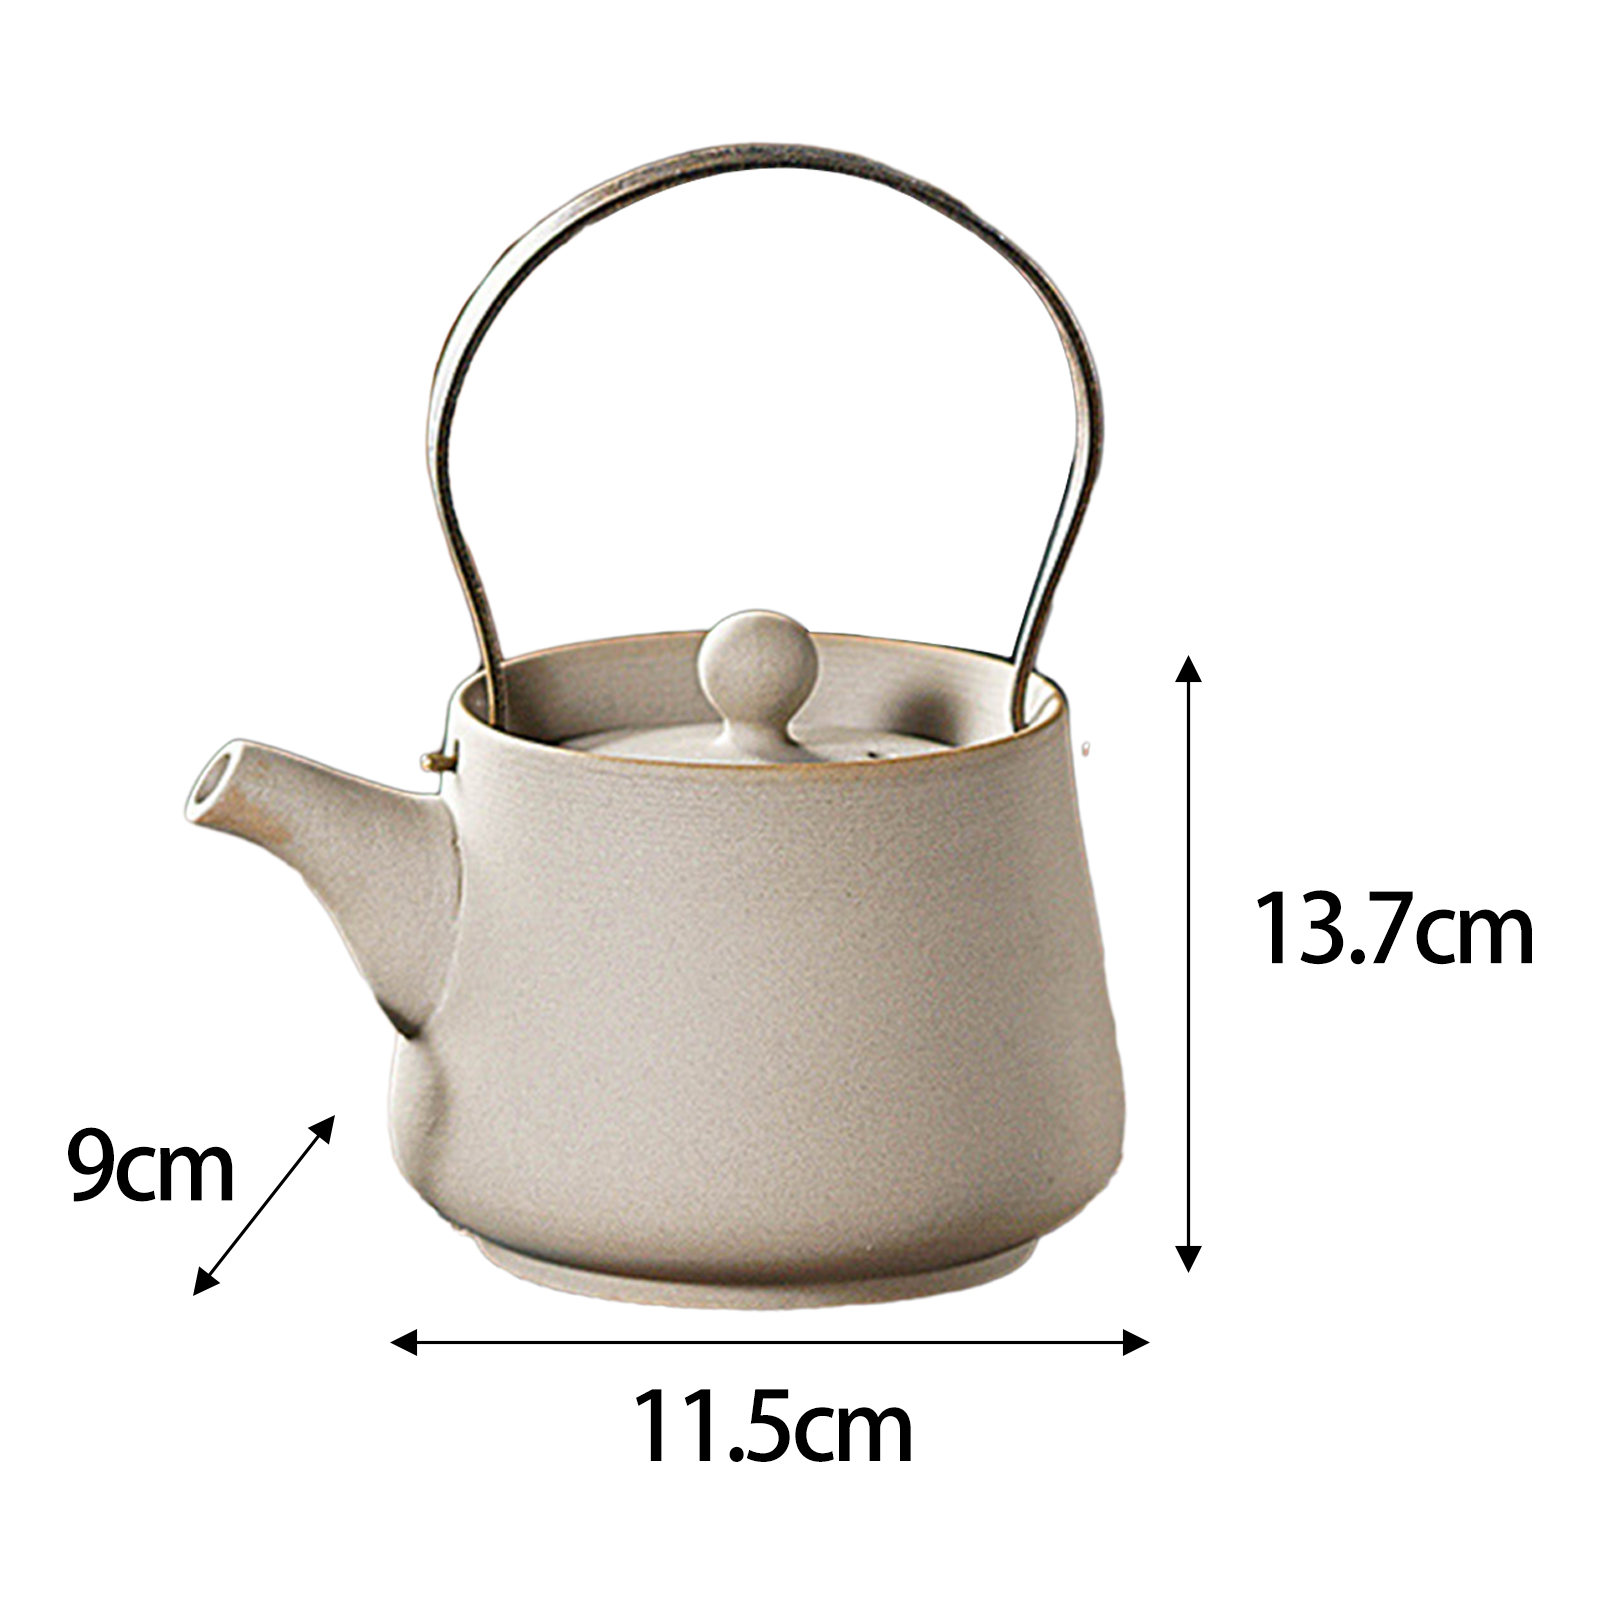 Chinese Ceramic Teapot with Lid 200ml Capacity with Tea Strainer Tea Infuser for Home Outdoor Kitchen Restaurant Camping